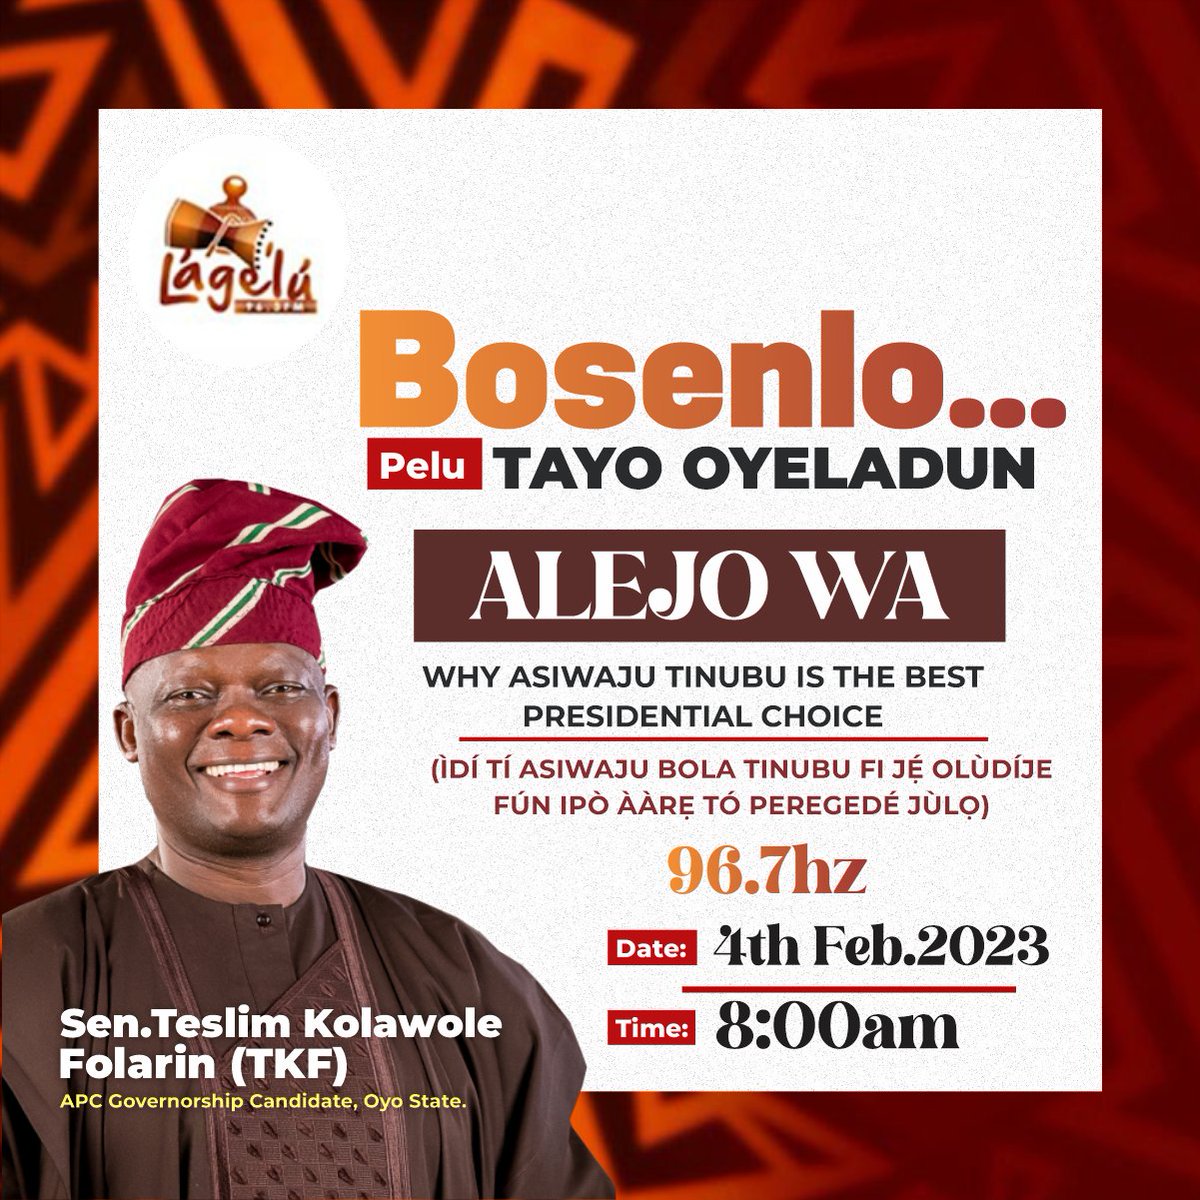 Great People of Oyo State,

Join me tomorrow (Saturday, 4th February)
on Bosenlo Lagelu FM 96.7 as we objectively discuss issues affecting the Nigerian populace and @officialABAT / @KashimSM 2023 Renewed Hope Agenda.

@OfficialAPCNg @APCUKingdom 

1